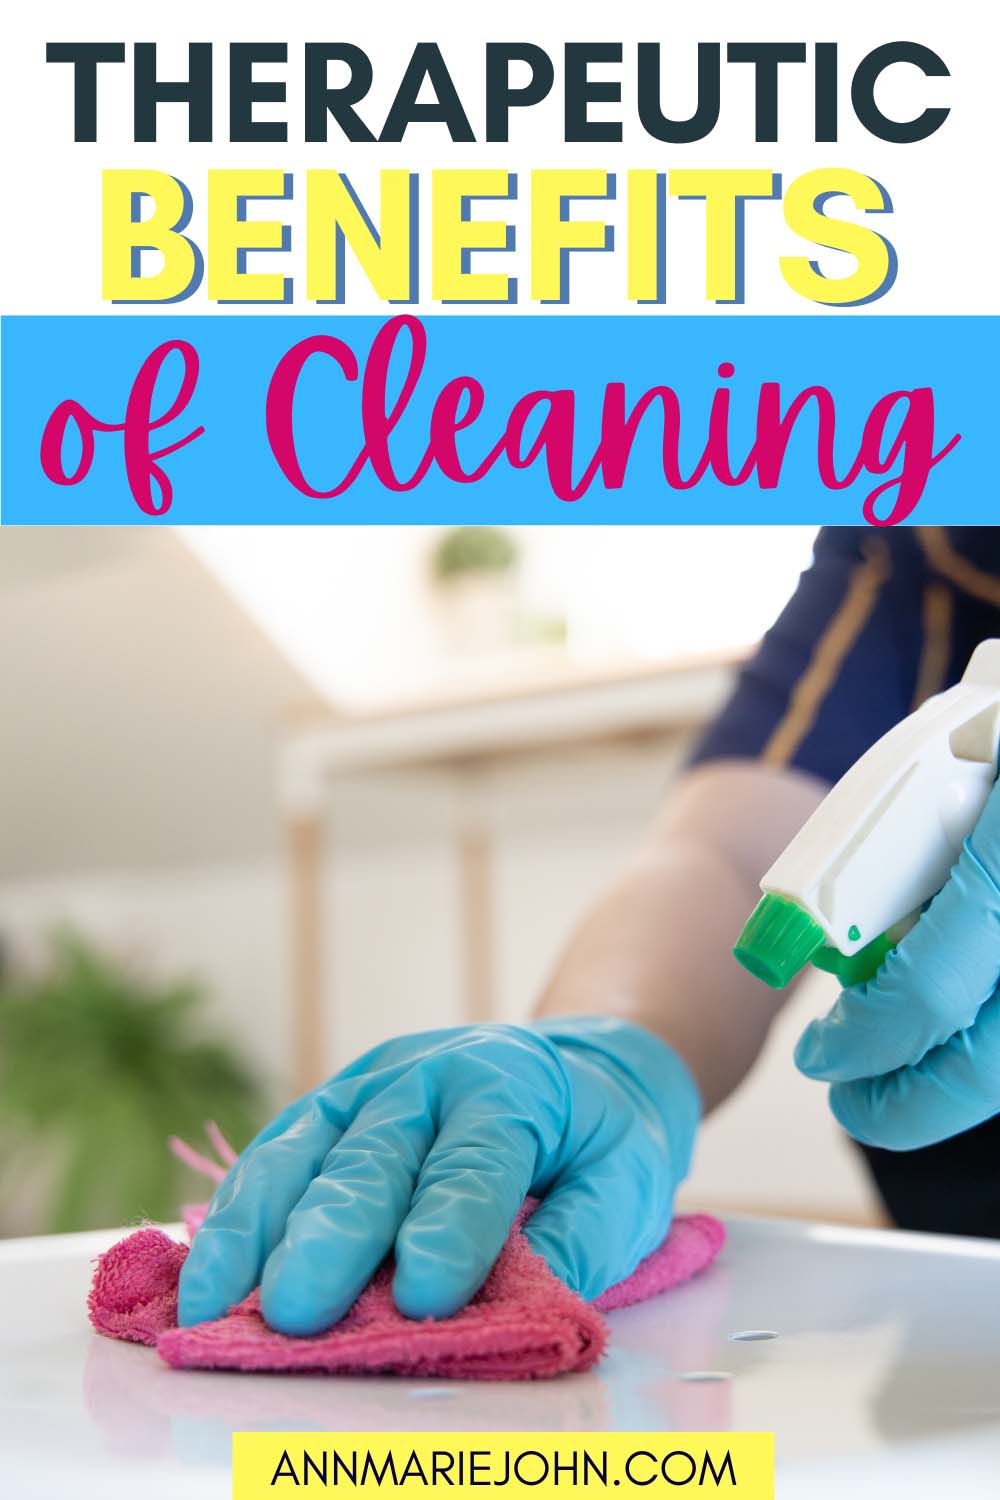 Therapeutic Benefits of Cleaning